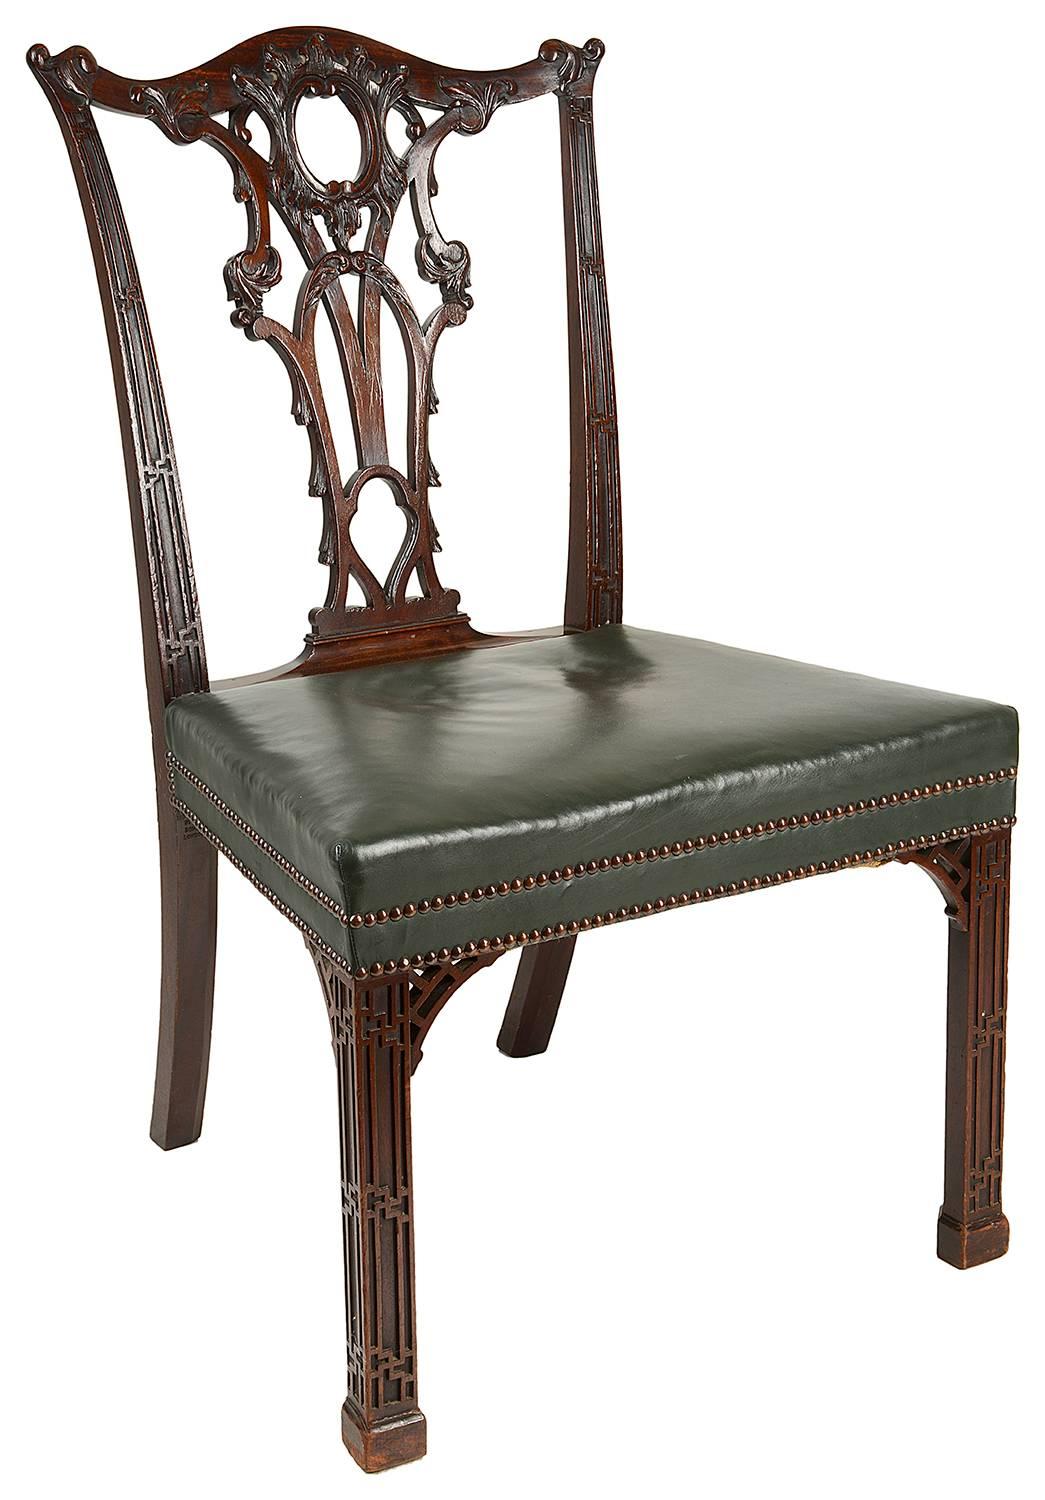 A fine quality set of 14 mahogany dining chairs in the Chippendale style (two later arms, 12 singles). Having carved scrolling foliate decoration to the backs, with gothic influenced blind fret work to the sides. Stuff over upholstered leather seats